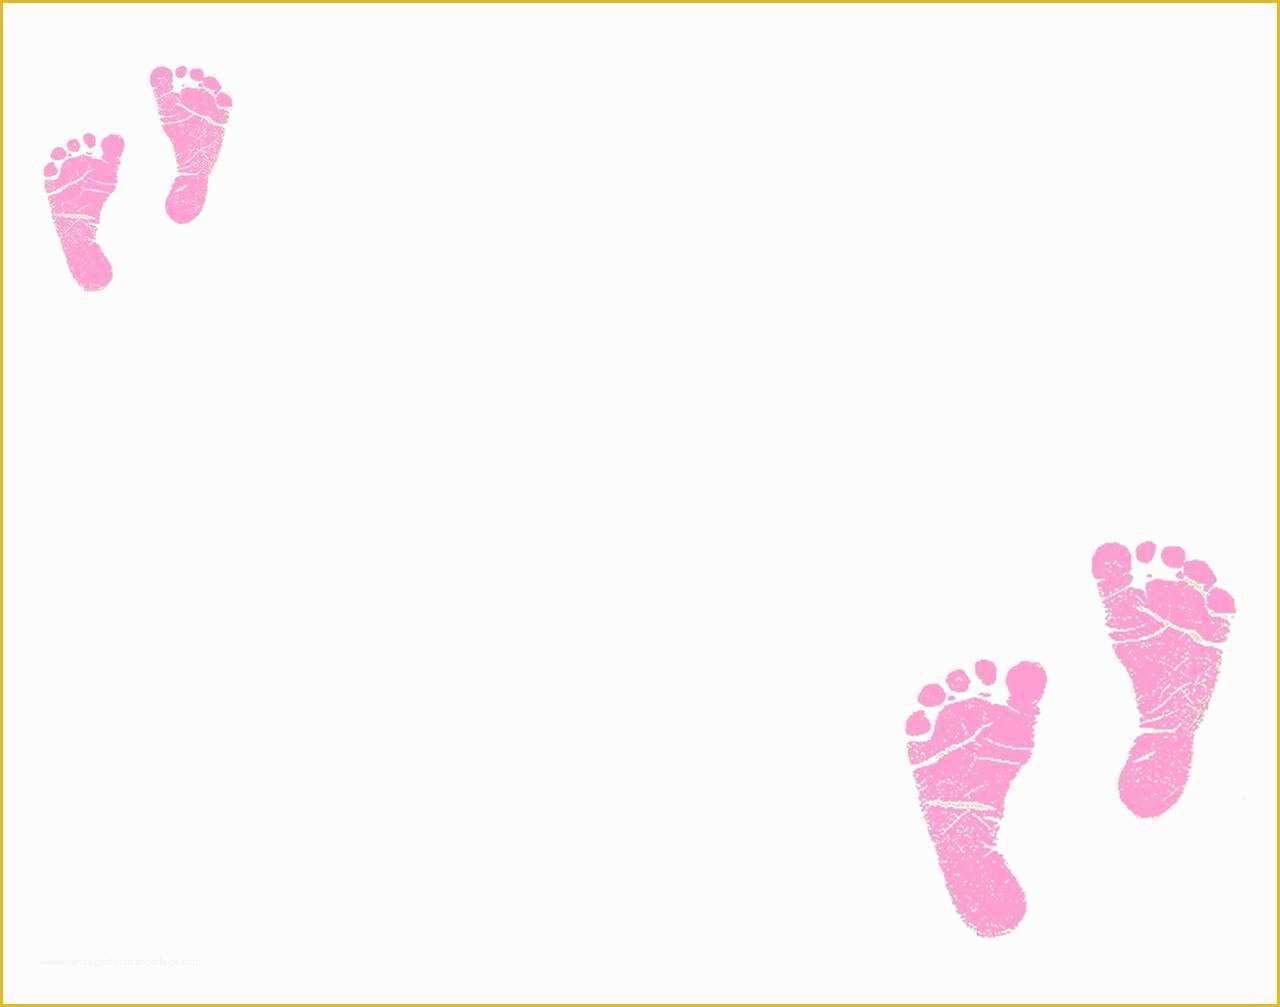 Free Baby Powerpoint Templates Backgrounds Of Baby Feet Ppt Backgrounds Baby Feet Ppt Photos Baby Feet